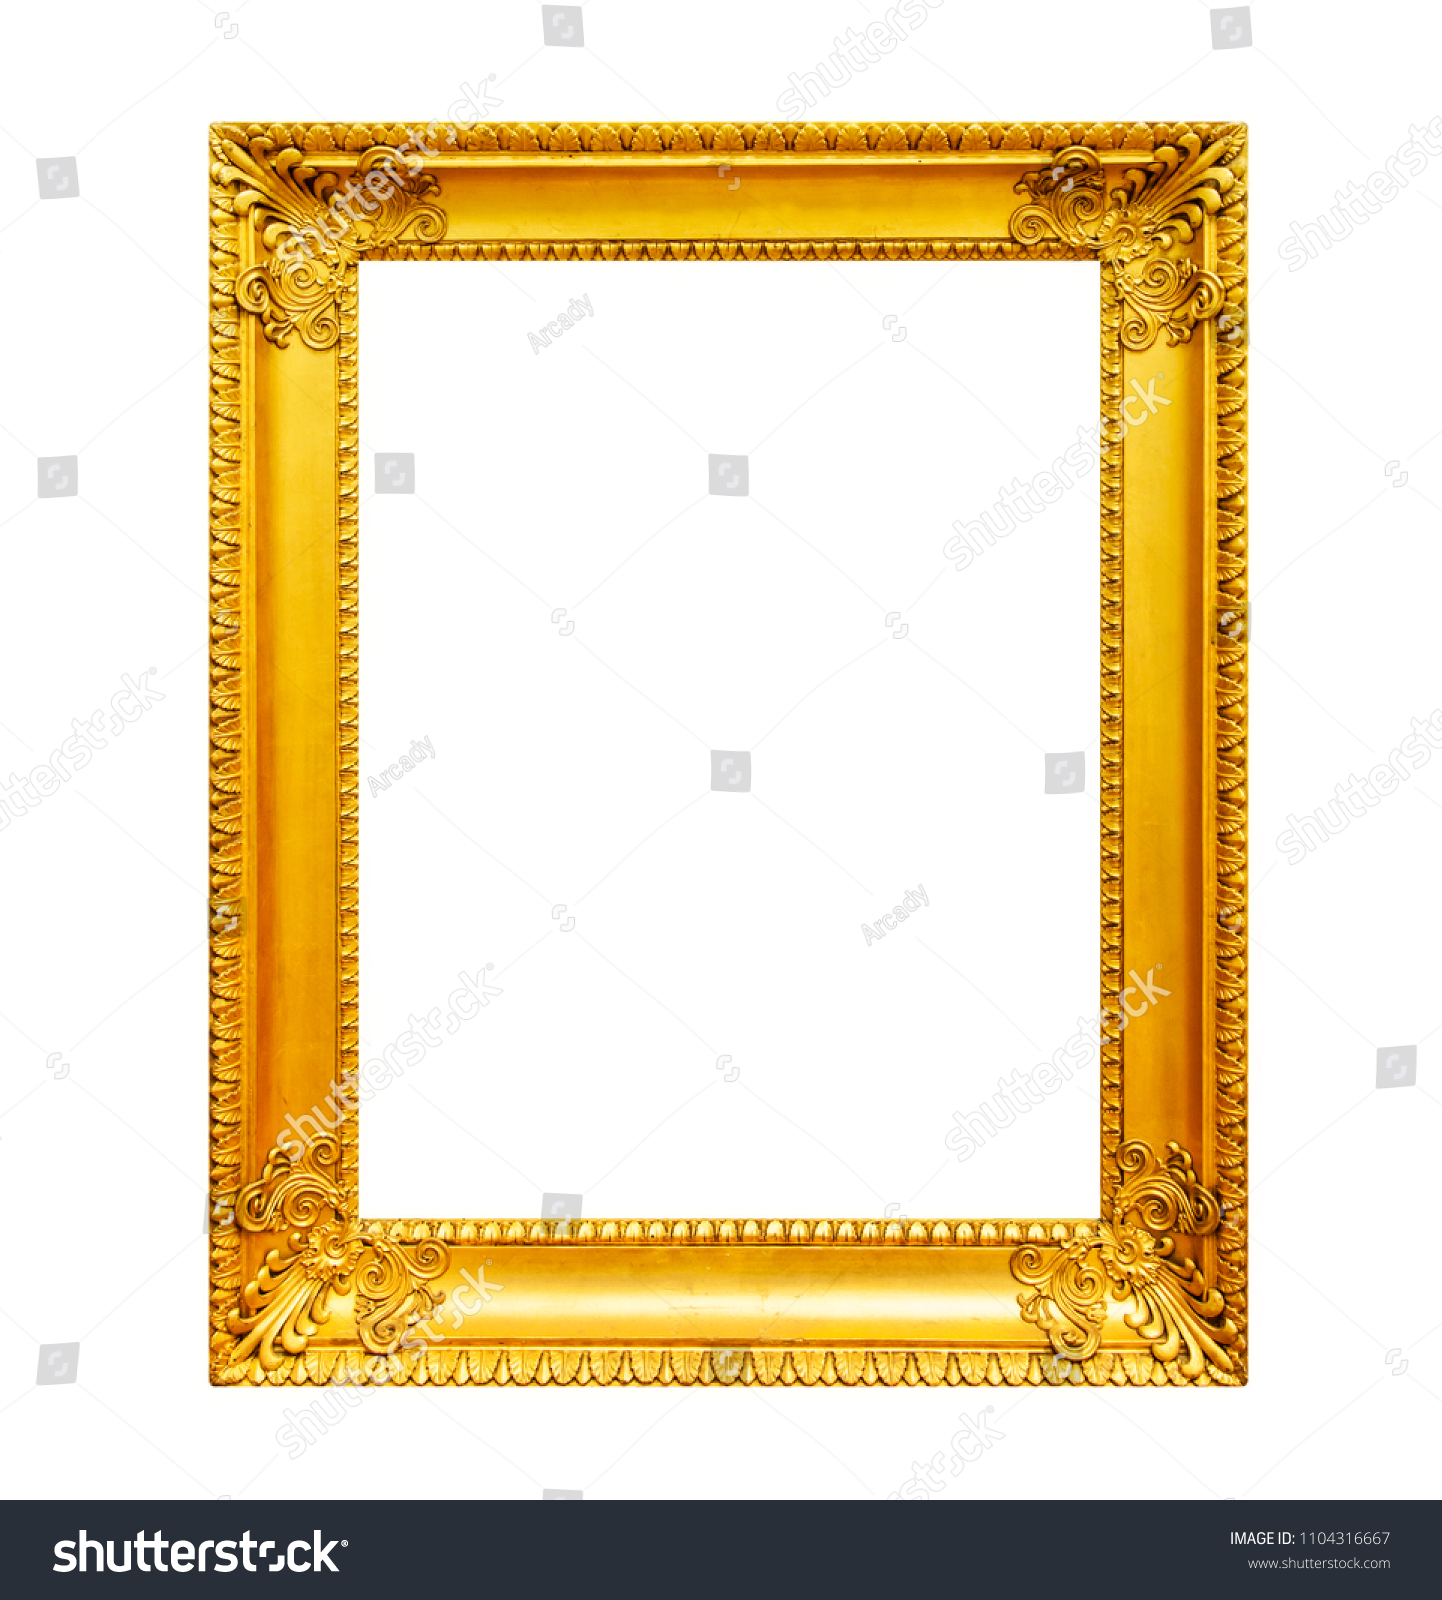 Old gilded wooden frame isolated on white background #1104316667